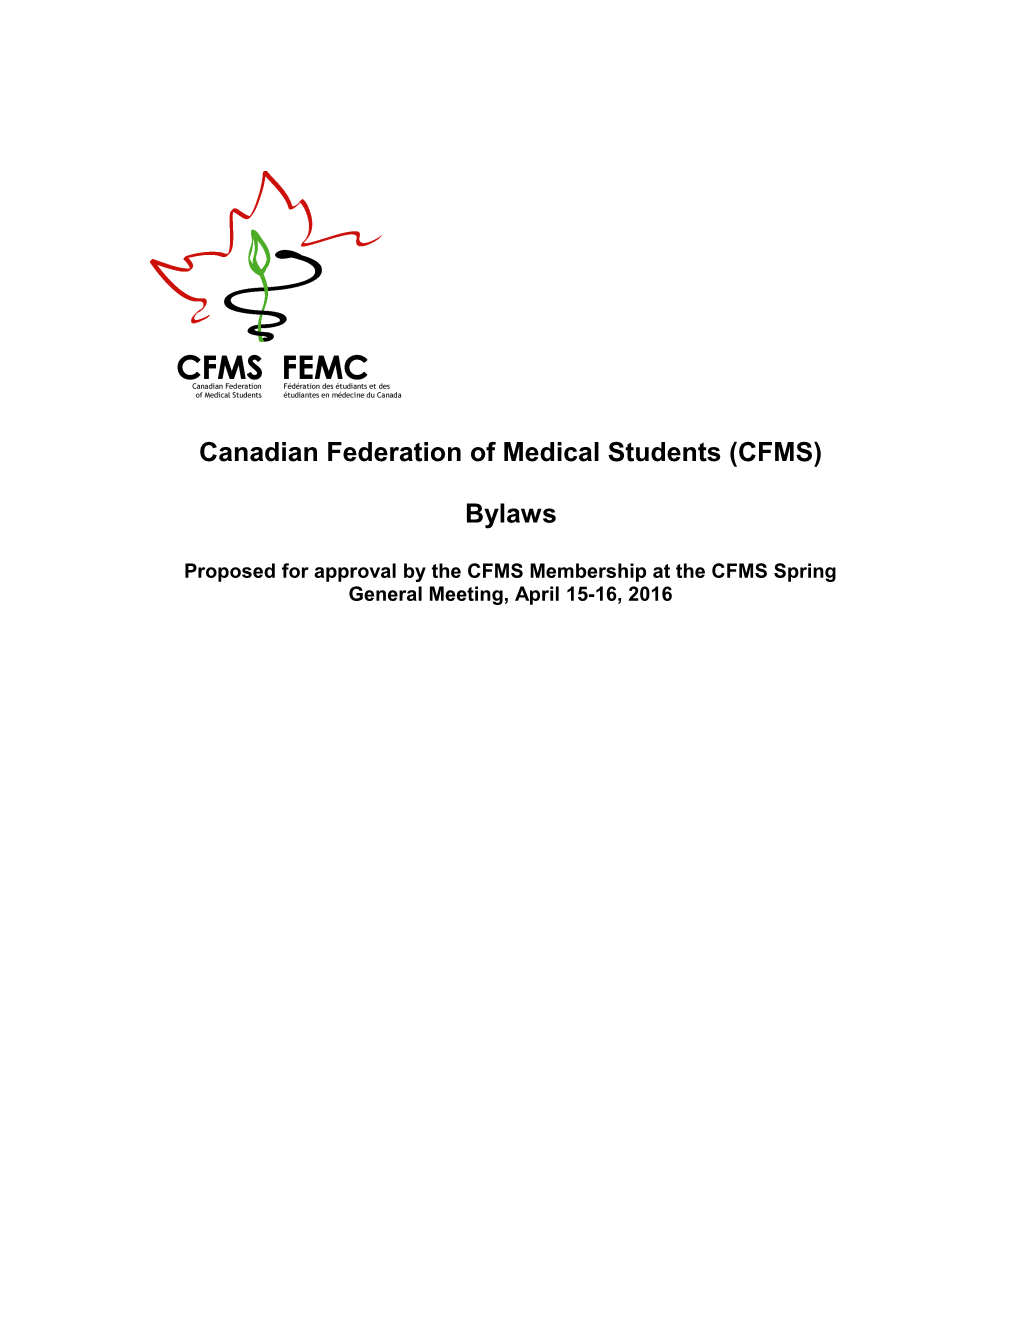 Canadian Federation of Medical Students - Bylaws